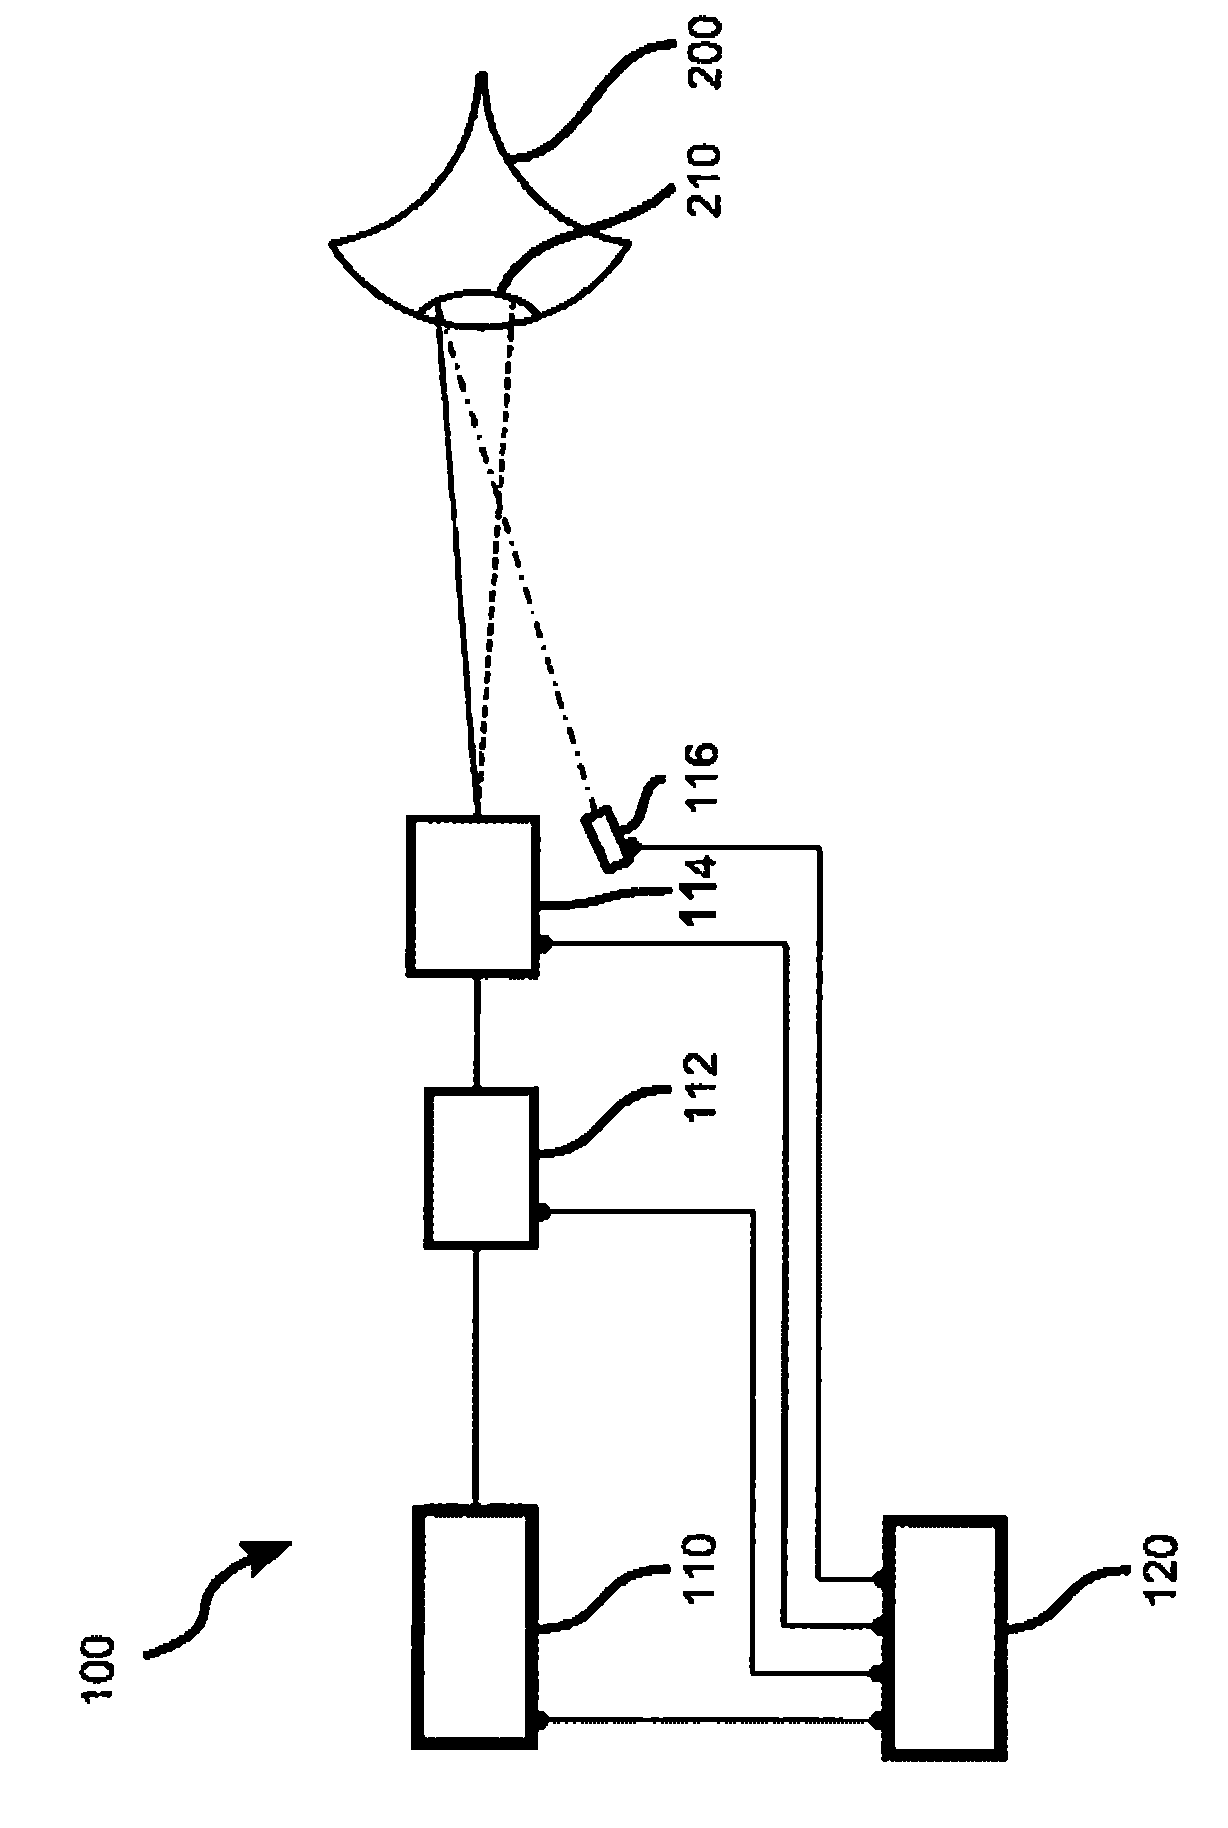 Apparatus for laser surgical ophthalmology